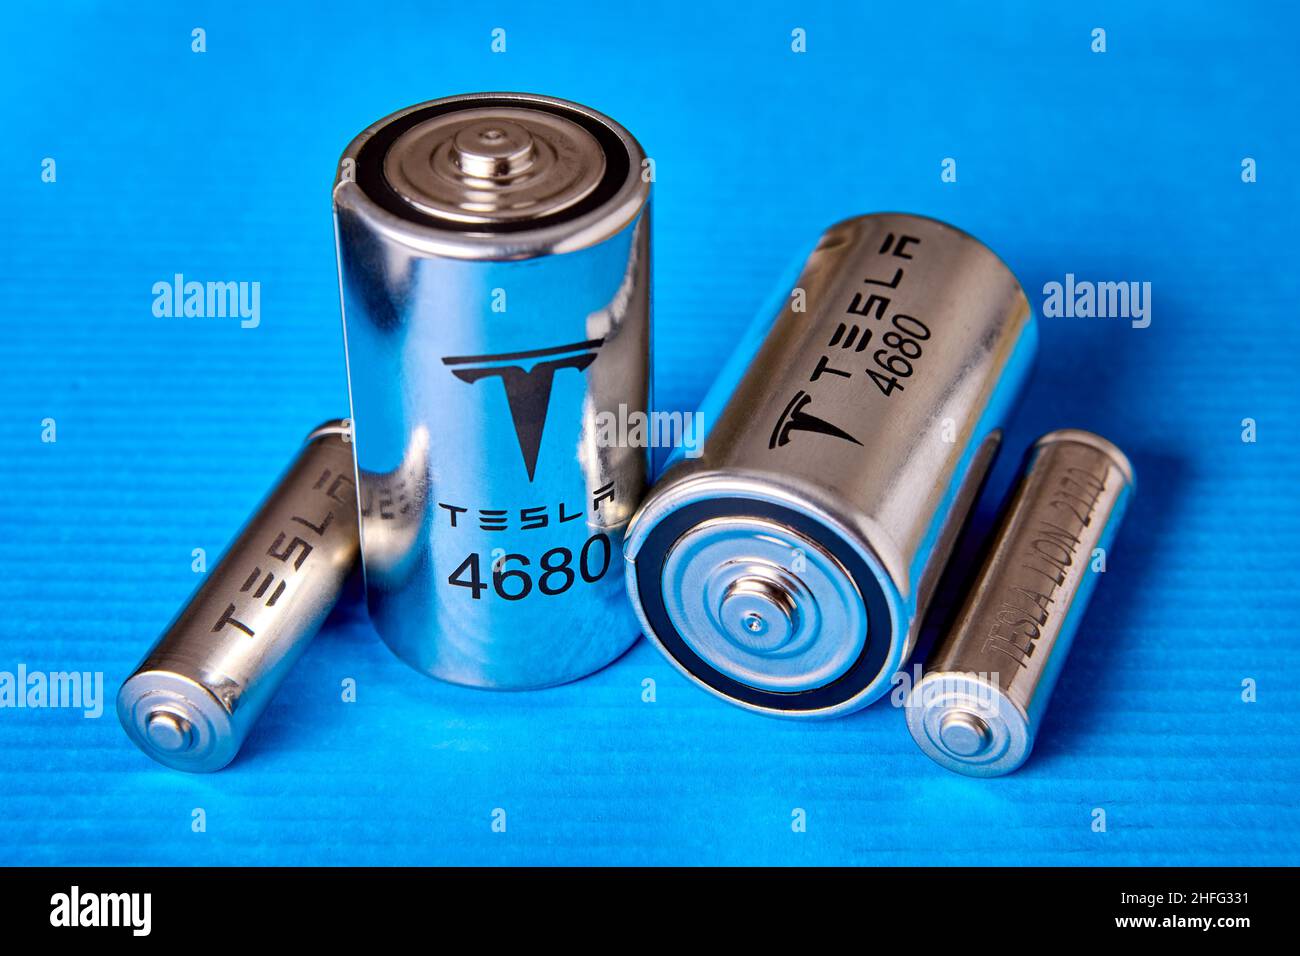 Tesla 2170 Battery Cell High Resolution Stock Photography and Images - Alamy